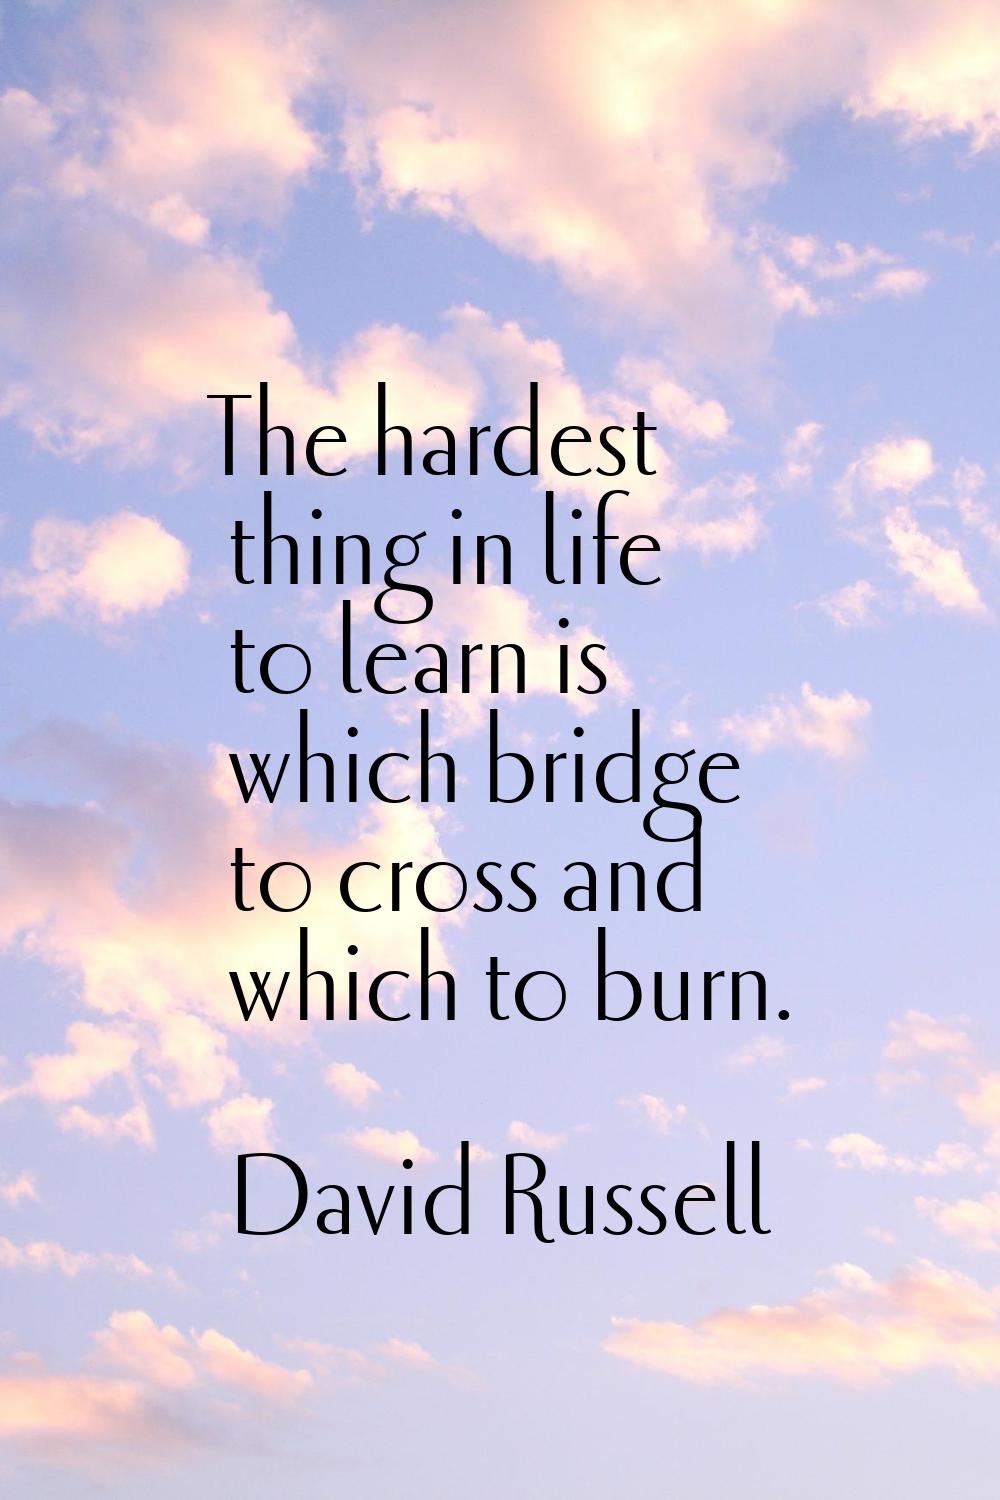 The hardest thing in life to learn is which bridge to cross and which to burn.